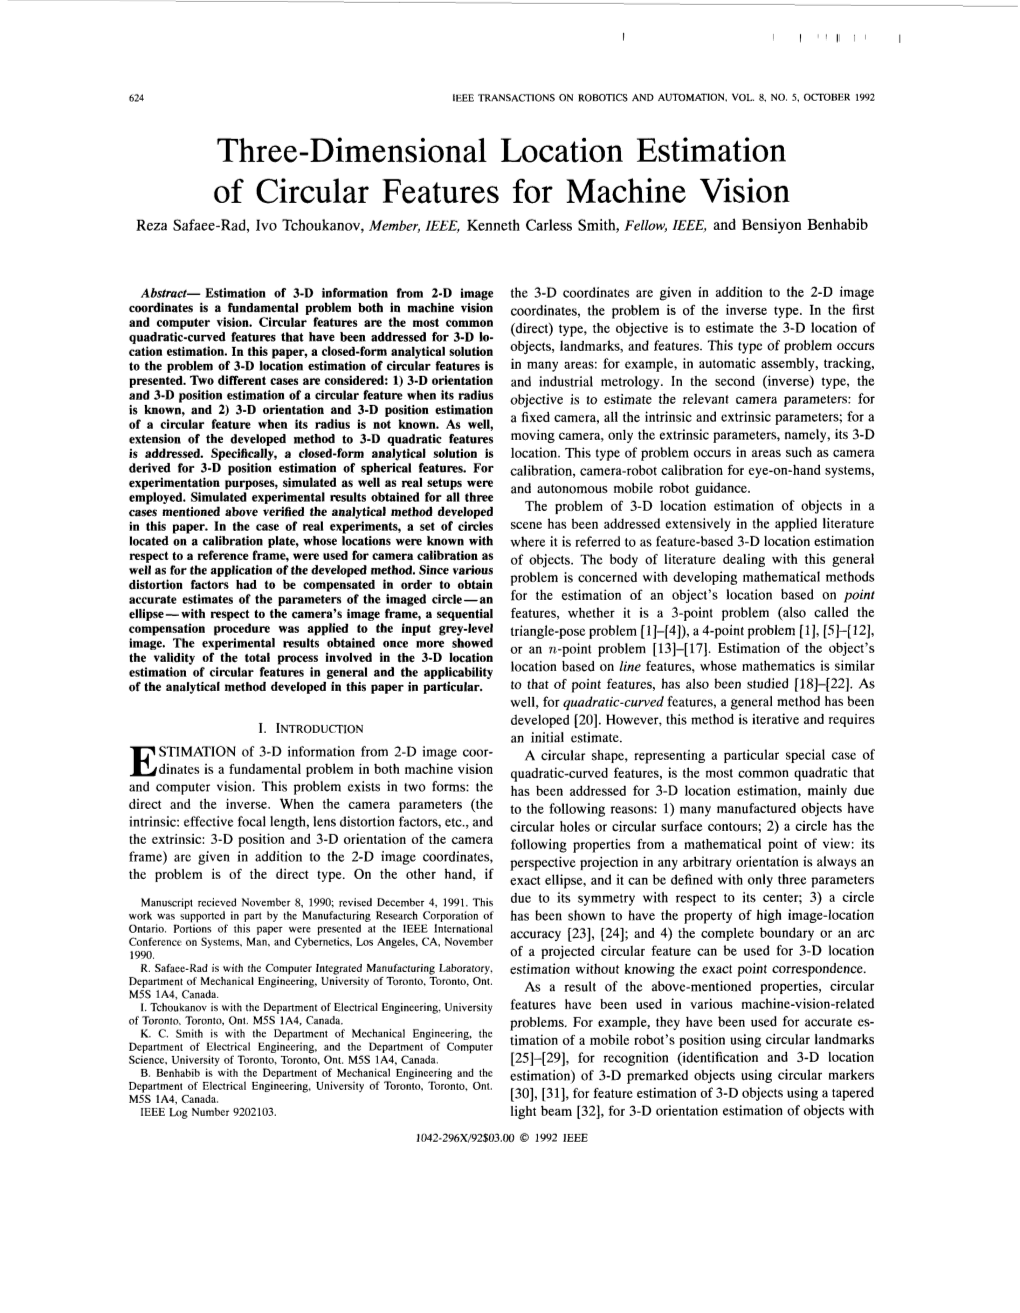 Three-Dimensional Location Estimation of Circular Features for Machine Vision